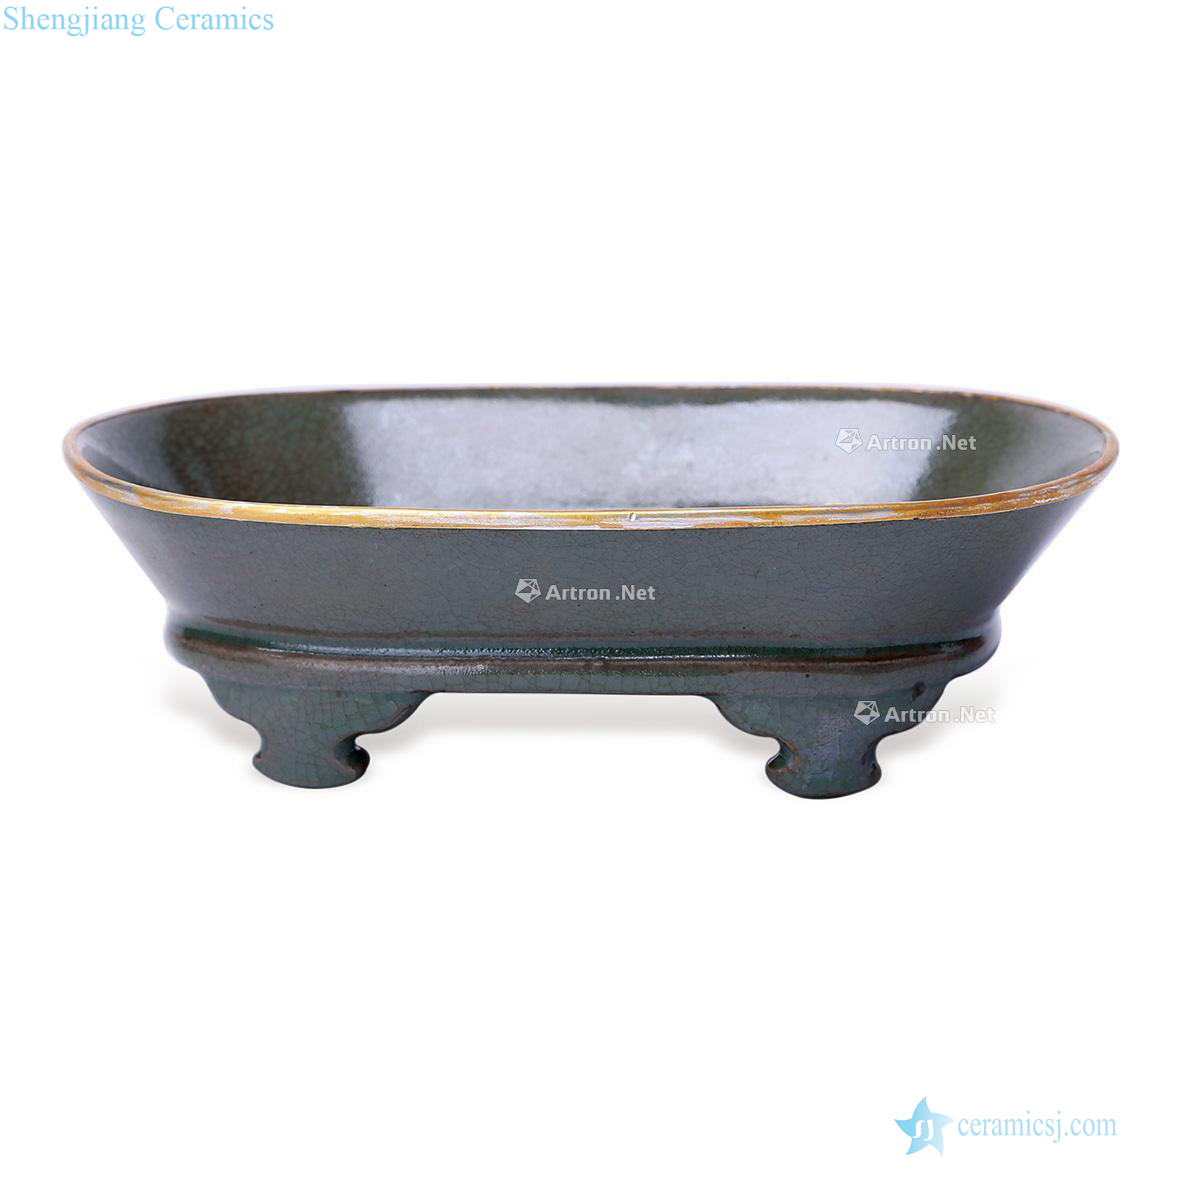 The song dynasty Your kiln narcissus basin